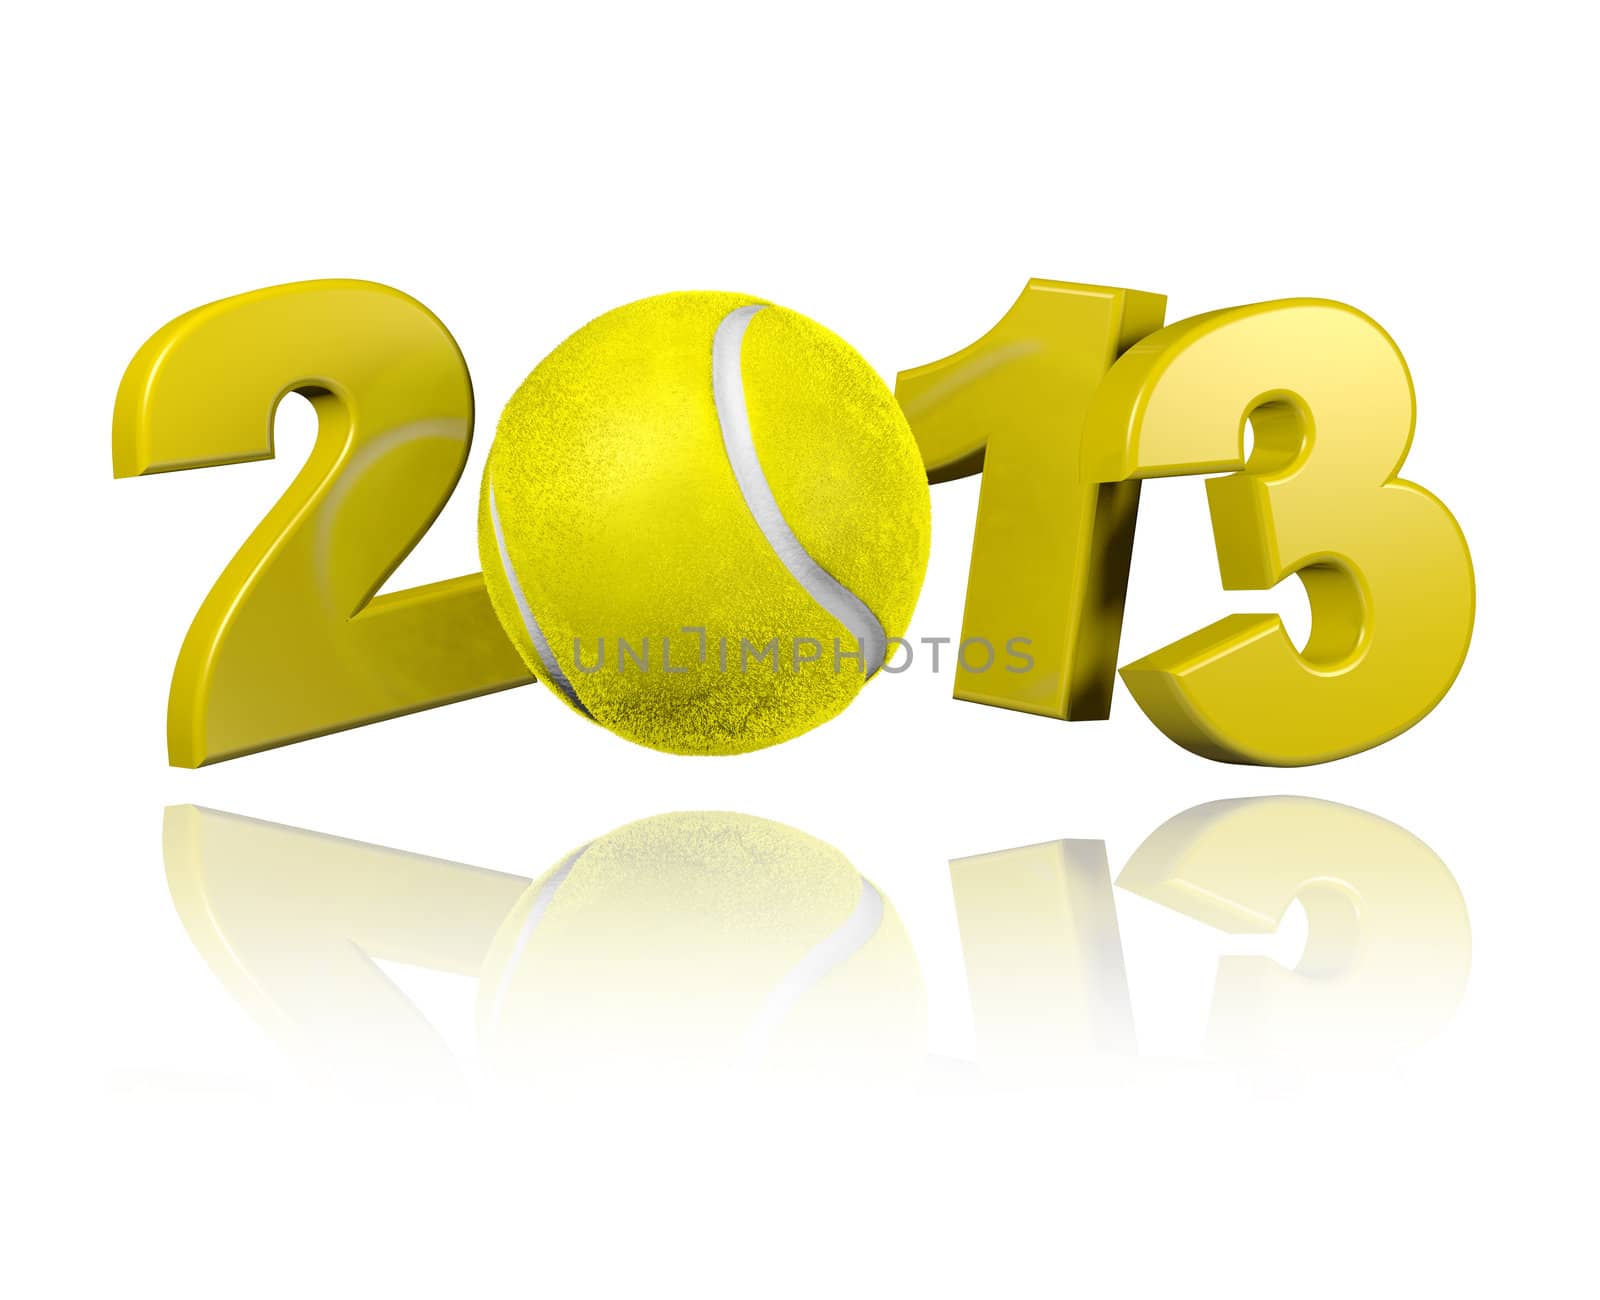 Tennis 2013 design with a White Background